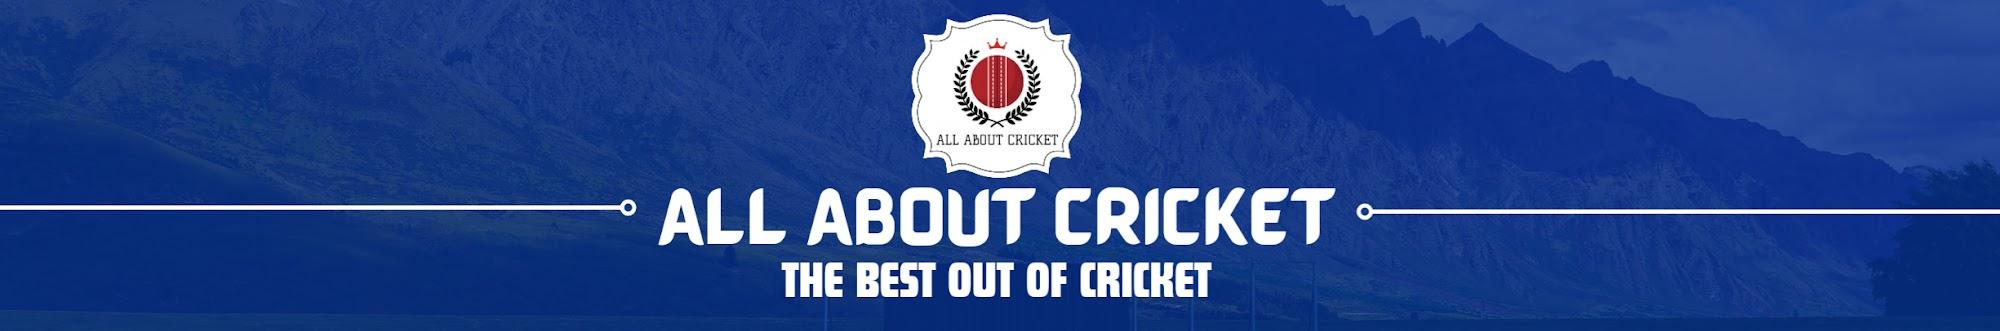 All About Cricket